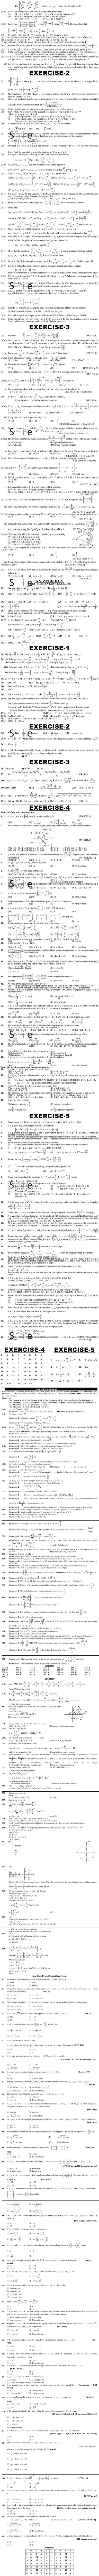 Maths Study Material - Chapter 1